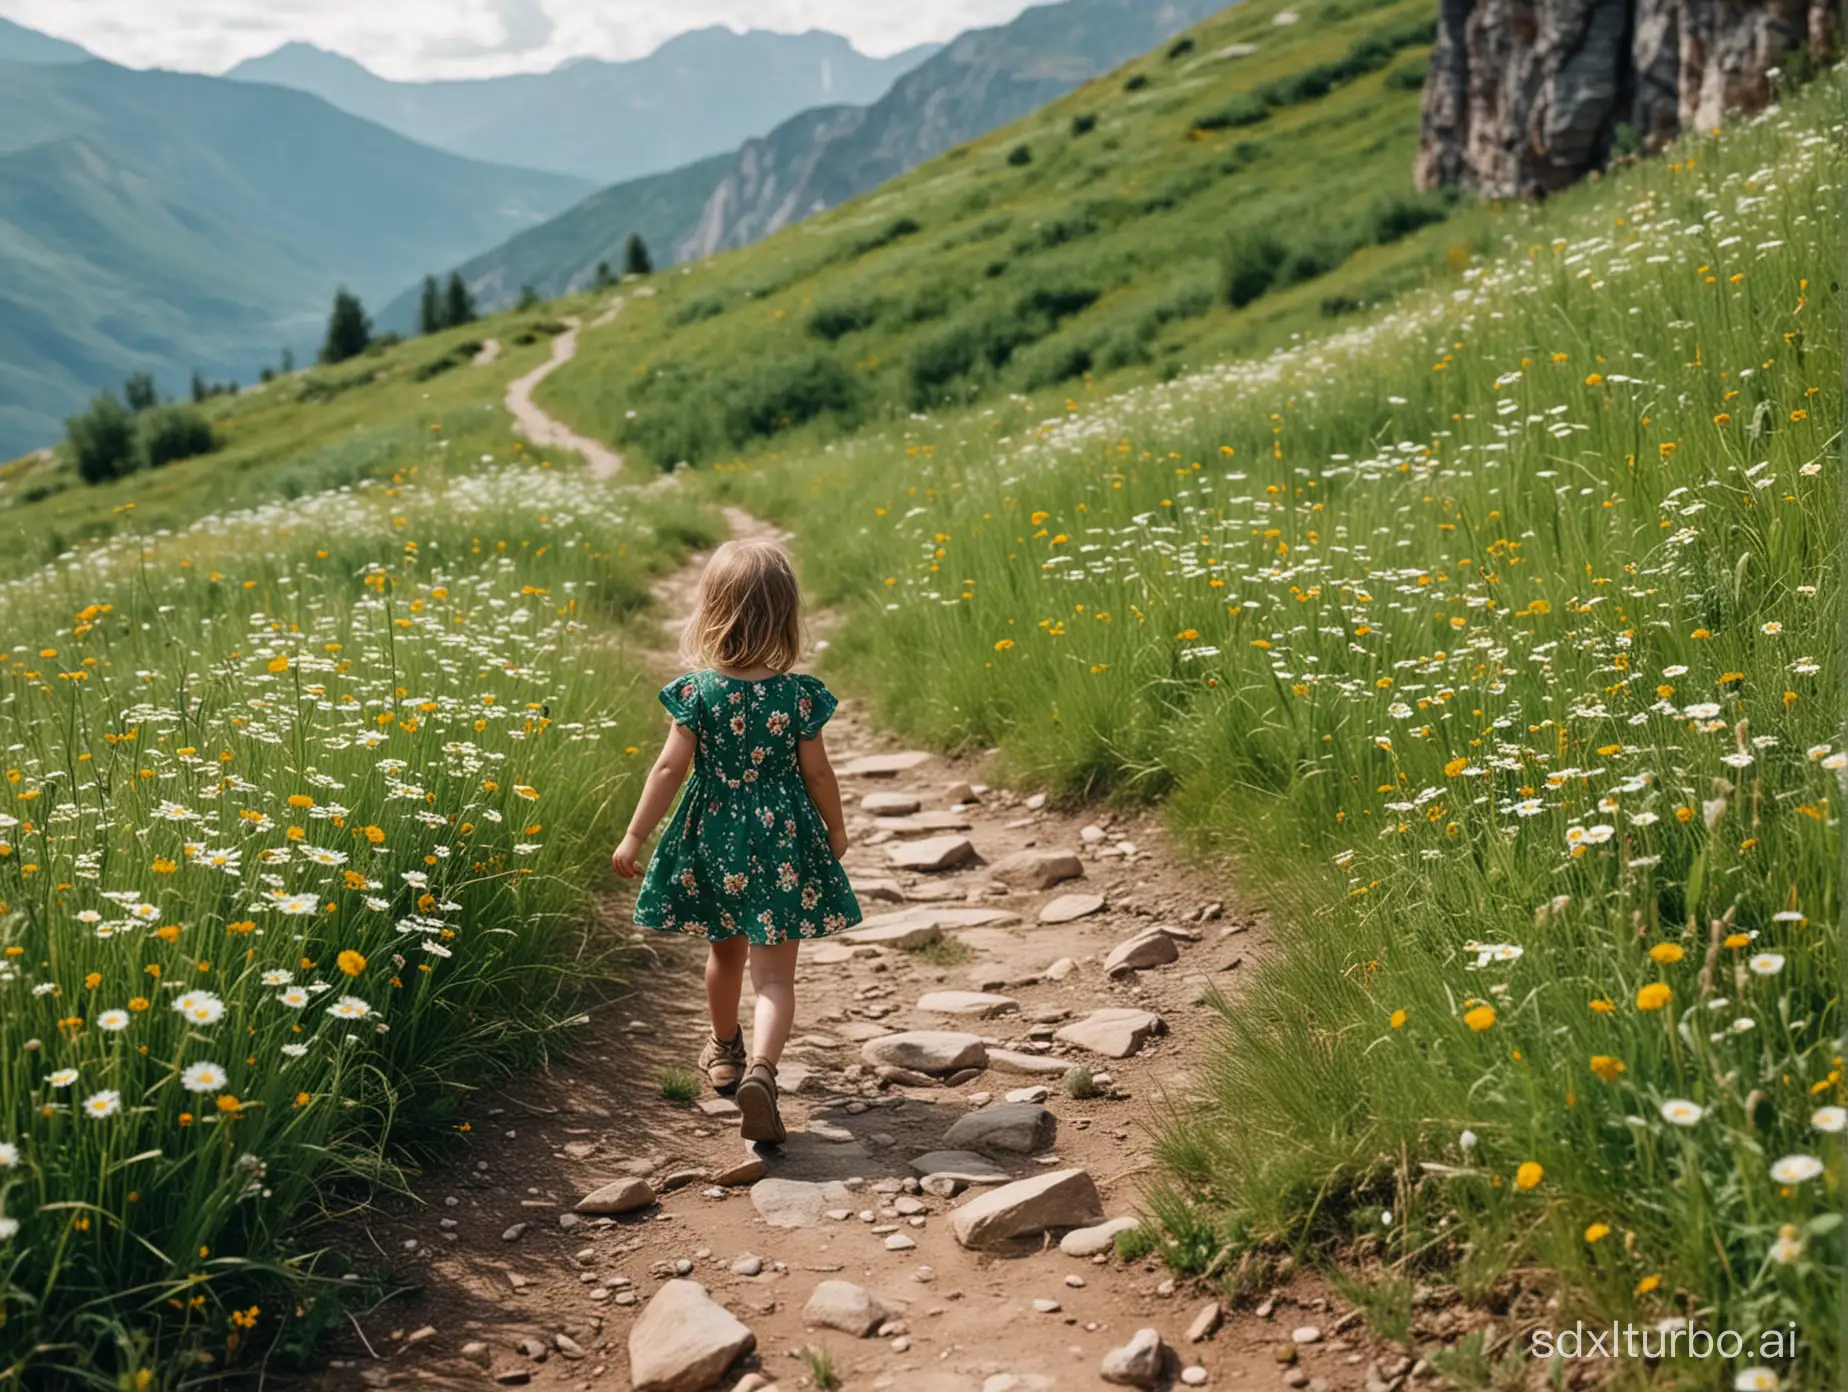 The little girl in a green floral dress walks on a mountain path covered with flowers and grass on both sides.